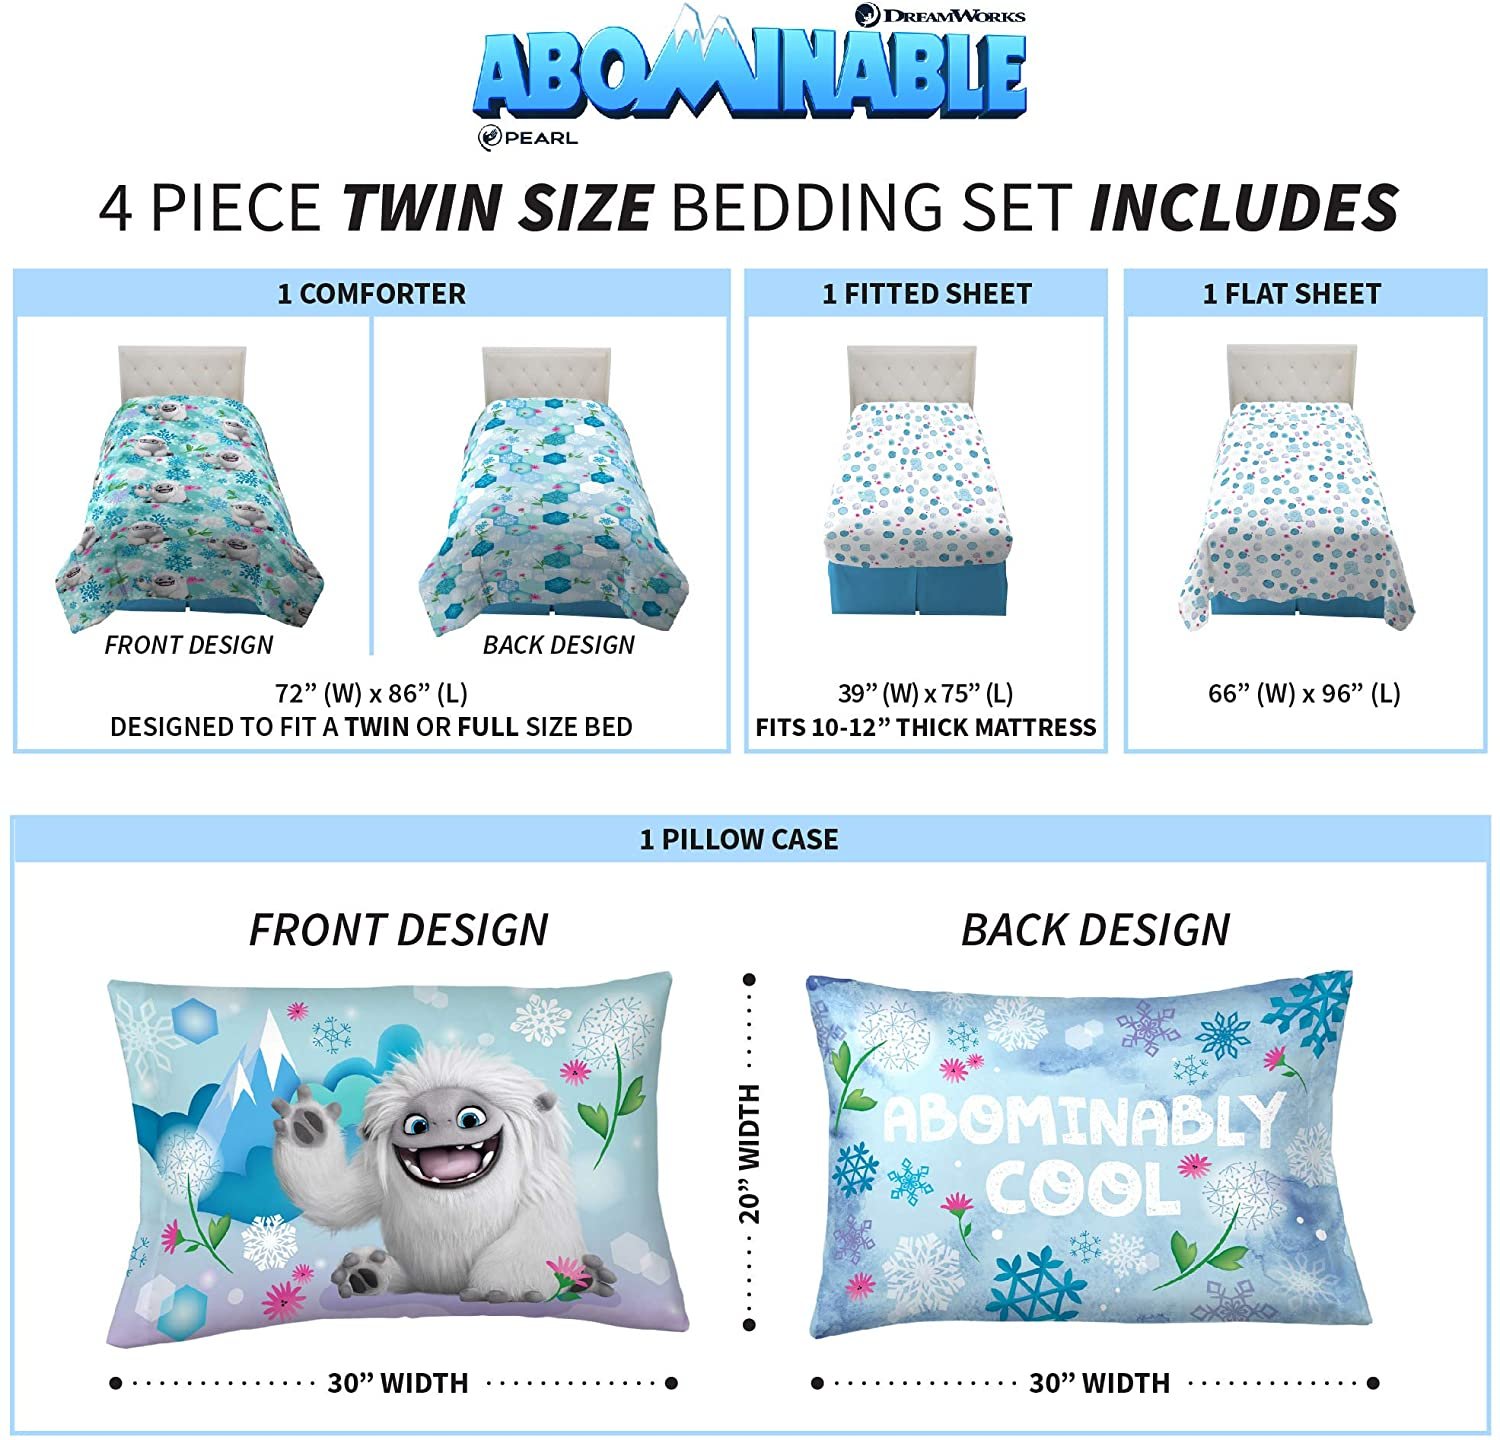 Franco Kids Bedding Comforter and Sheet Set, 4 Piece Twin Size, Abominable - image 4 of 9